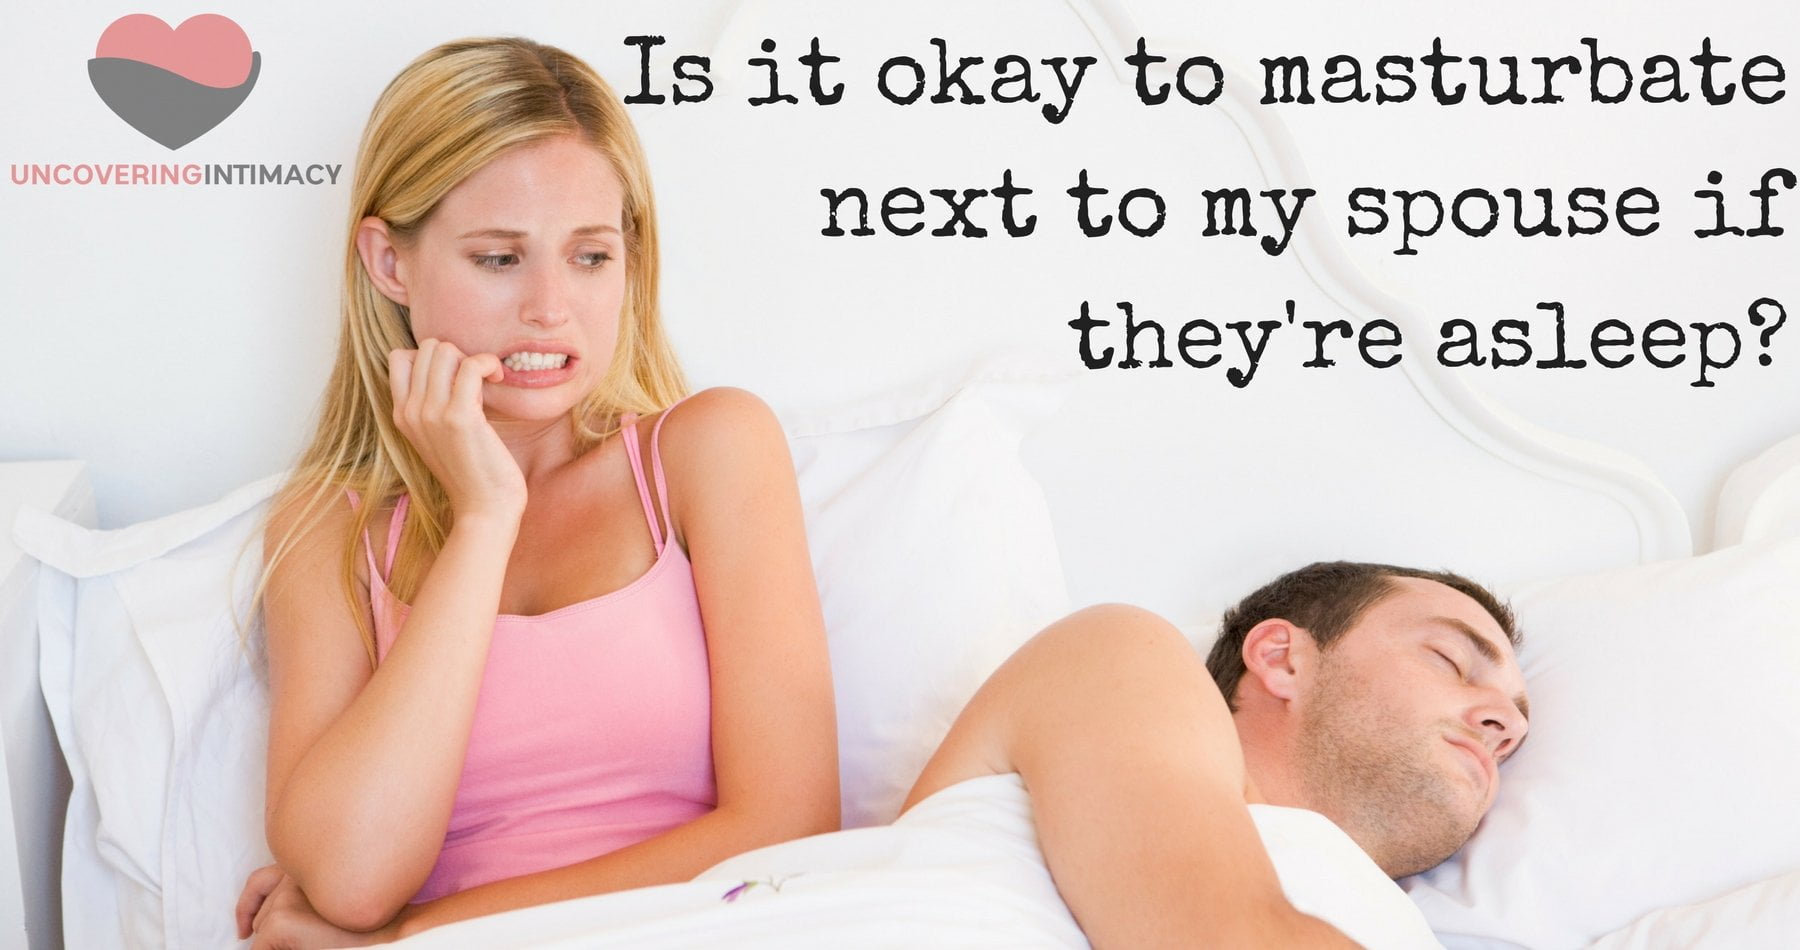 Is it okay to masturbate next to my spouse if theyre asleep? hq image